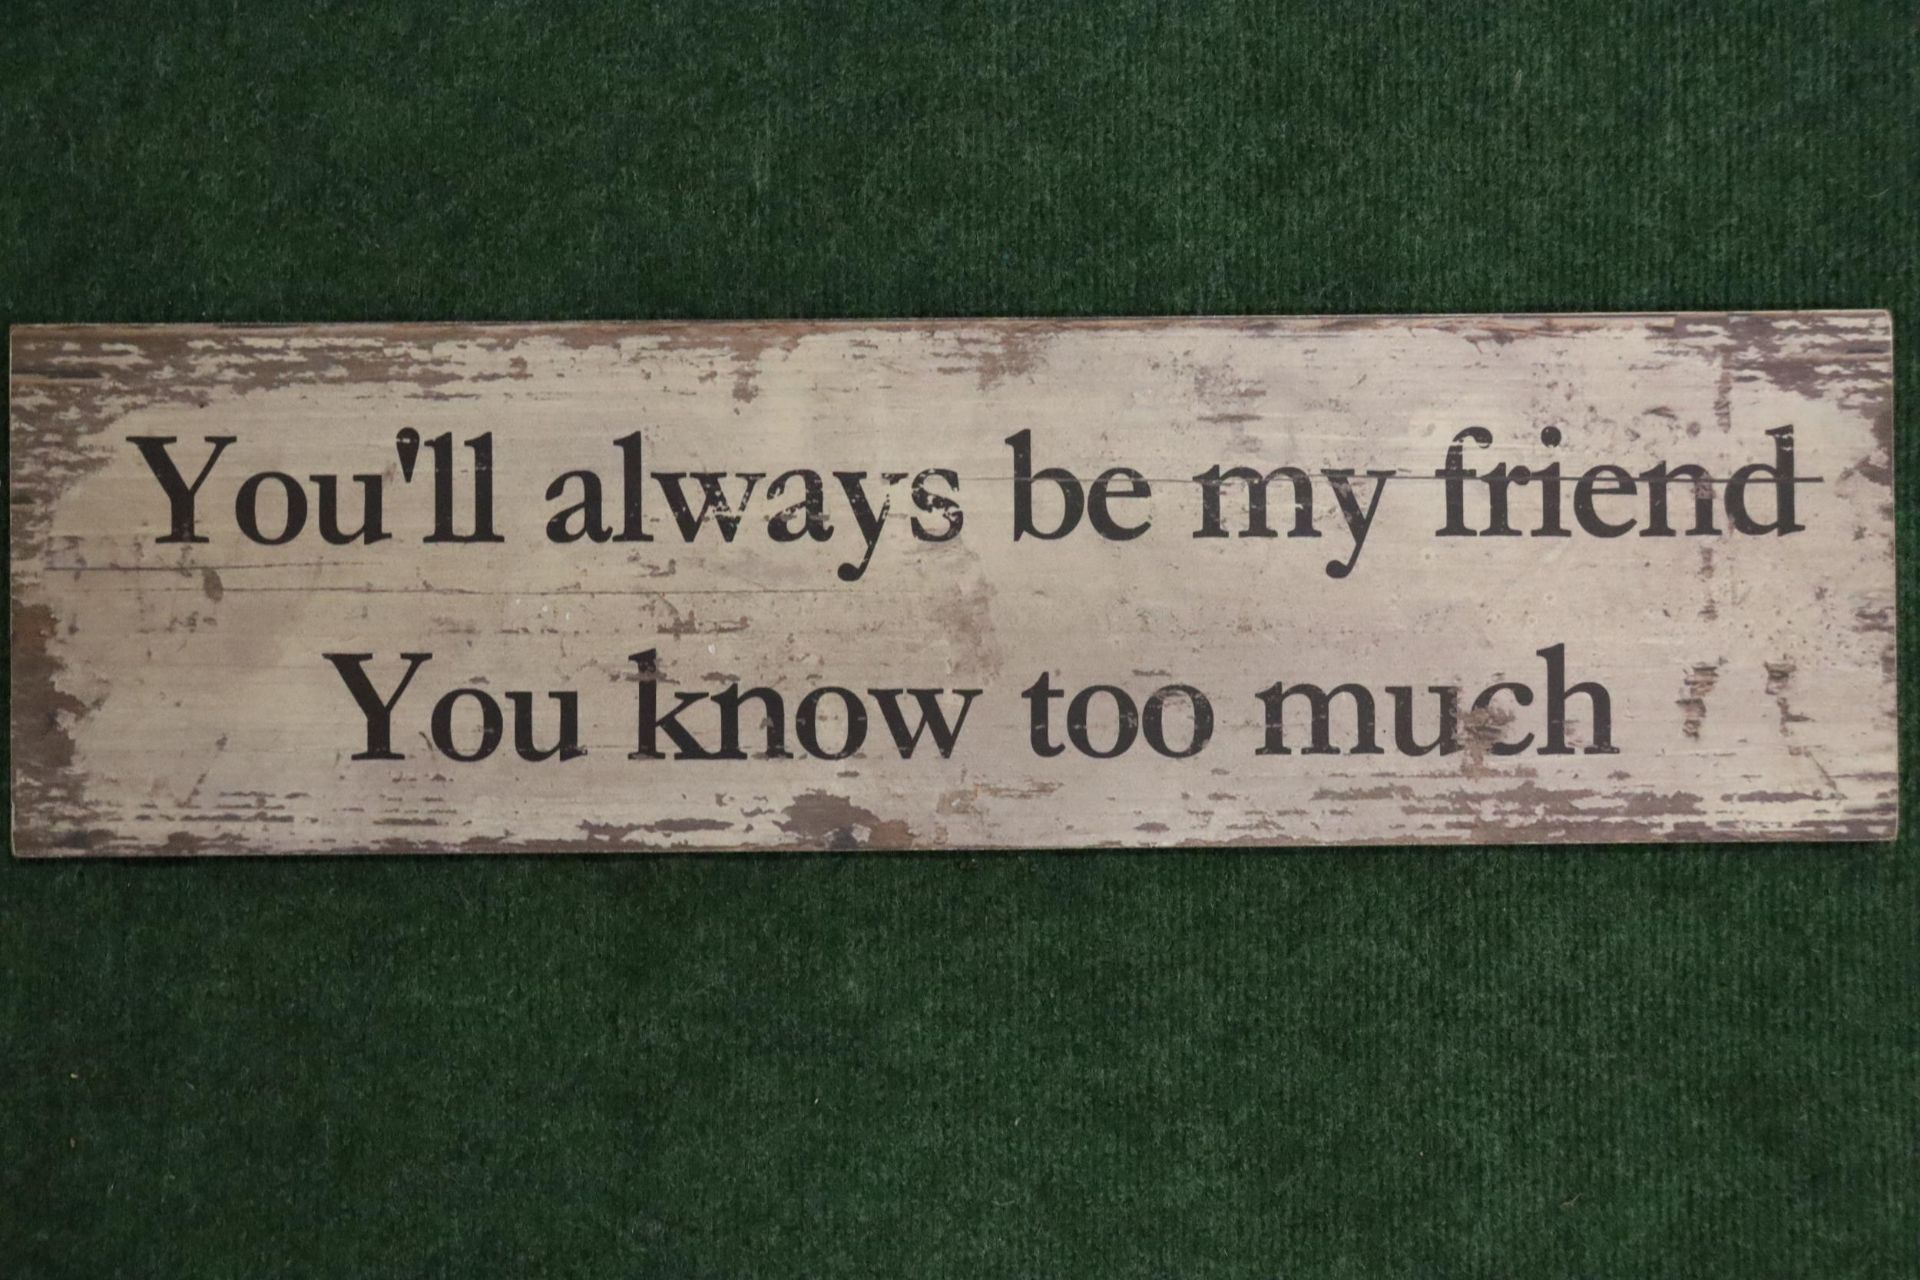 A WOODEN SIGN "YOU'LL ALWAYS BE MY FRIEND YOU KNOW TOO MUCH" 24x7"